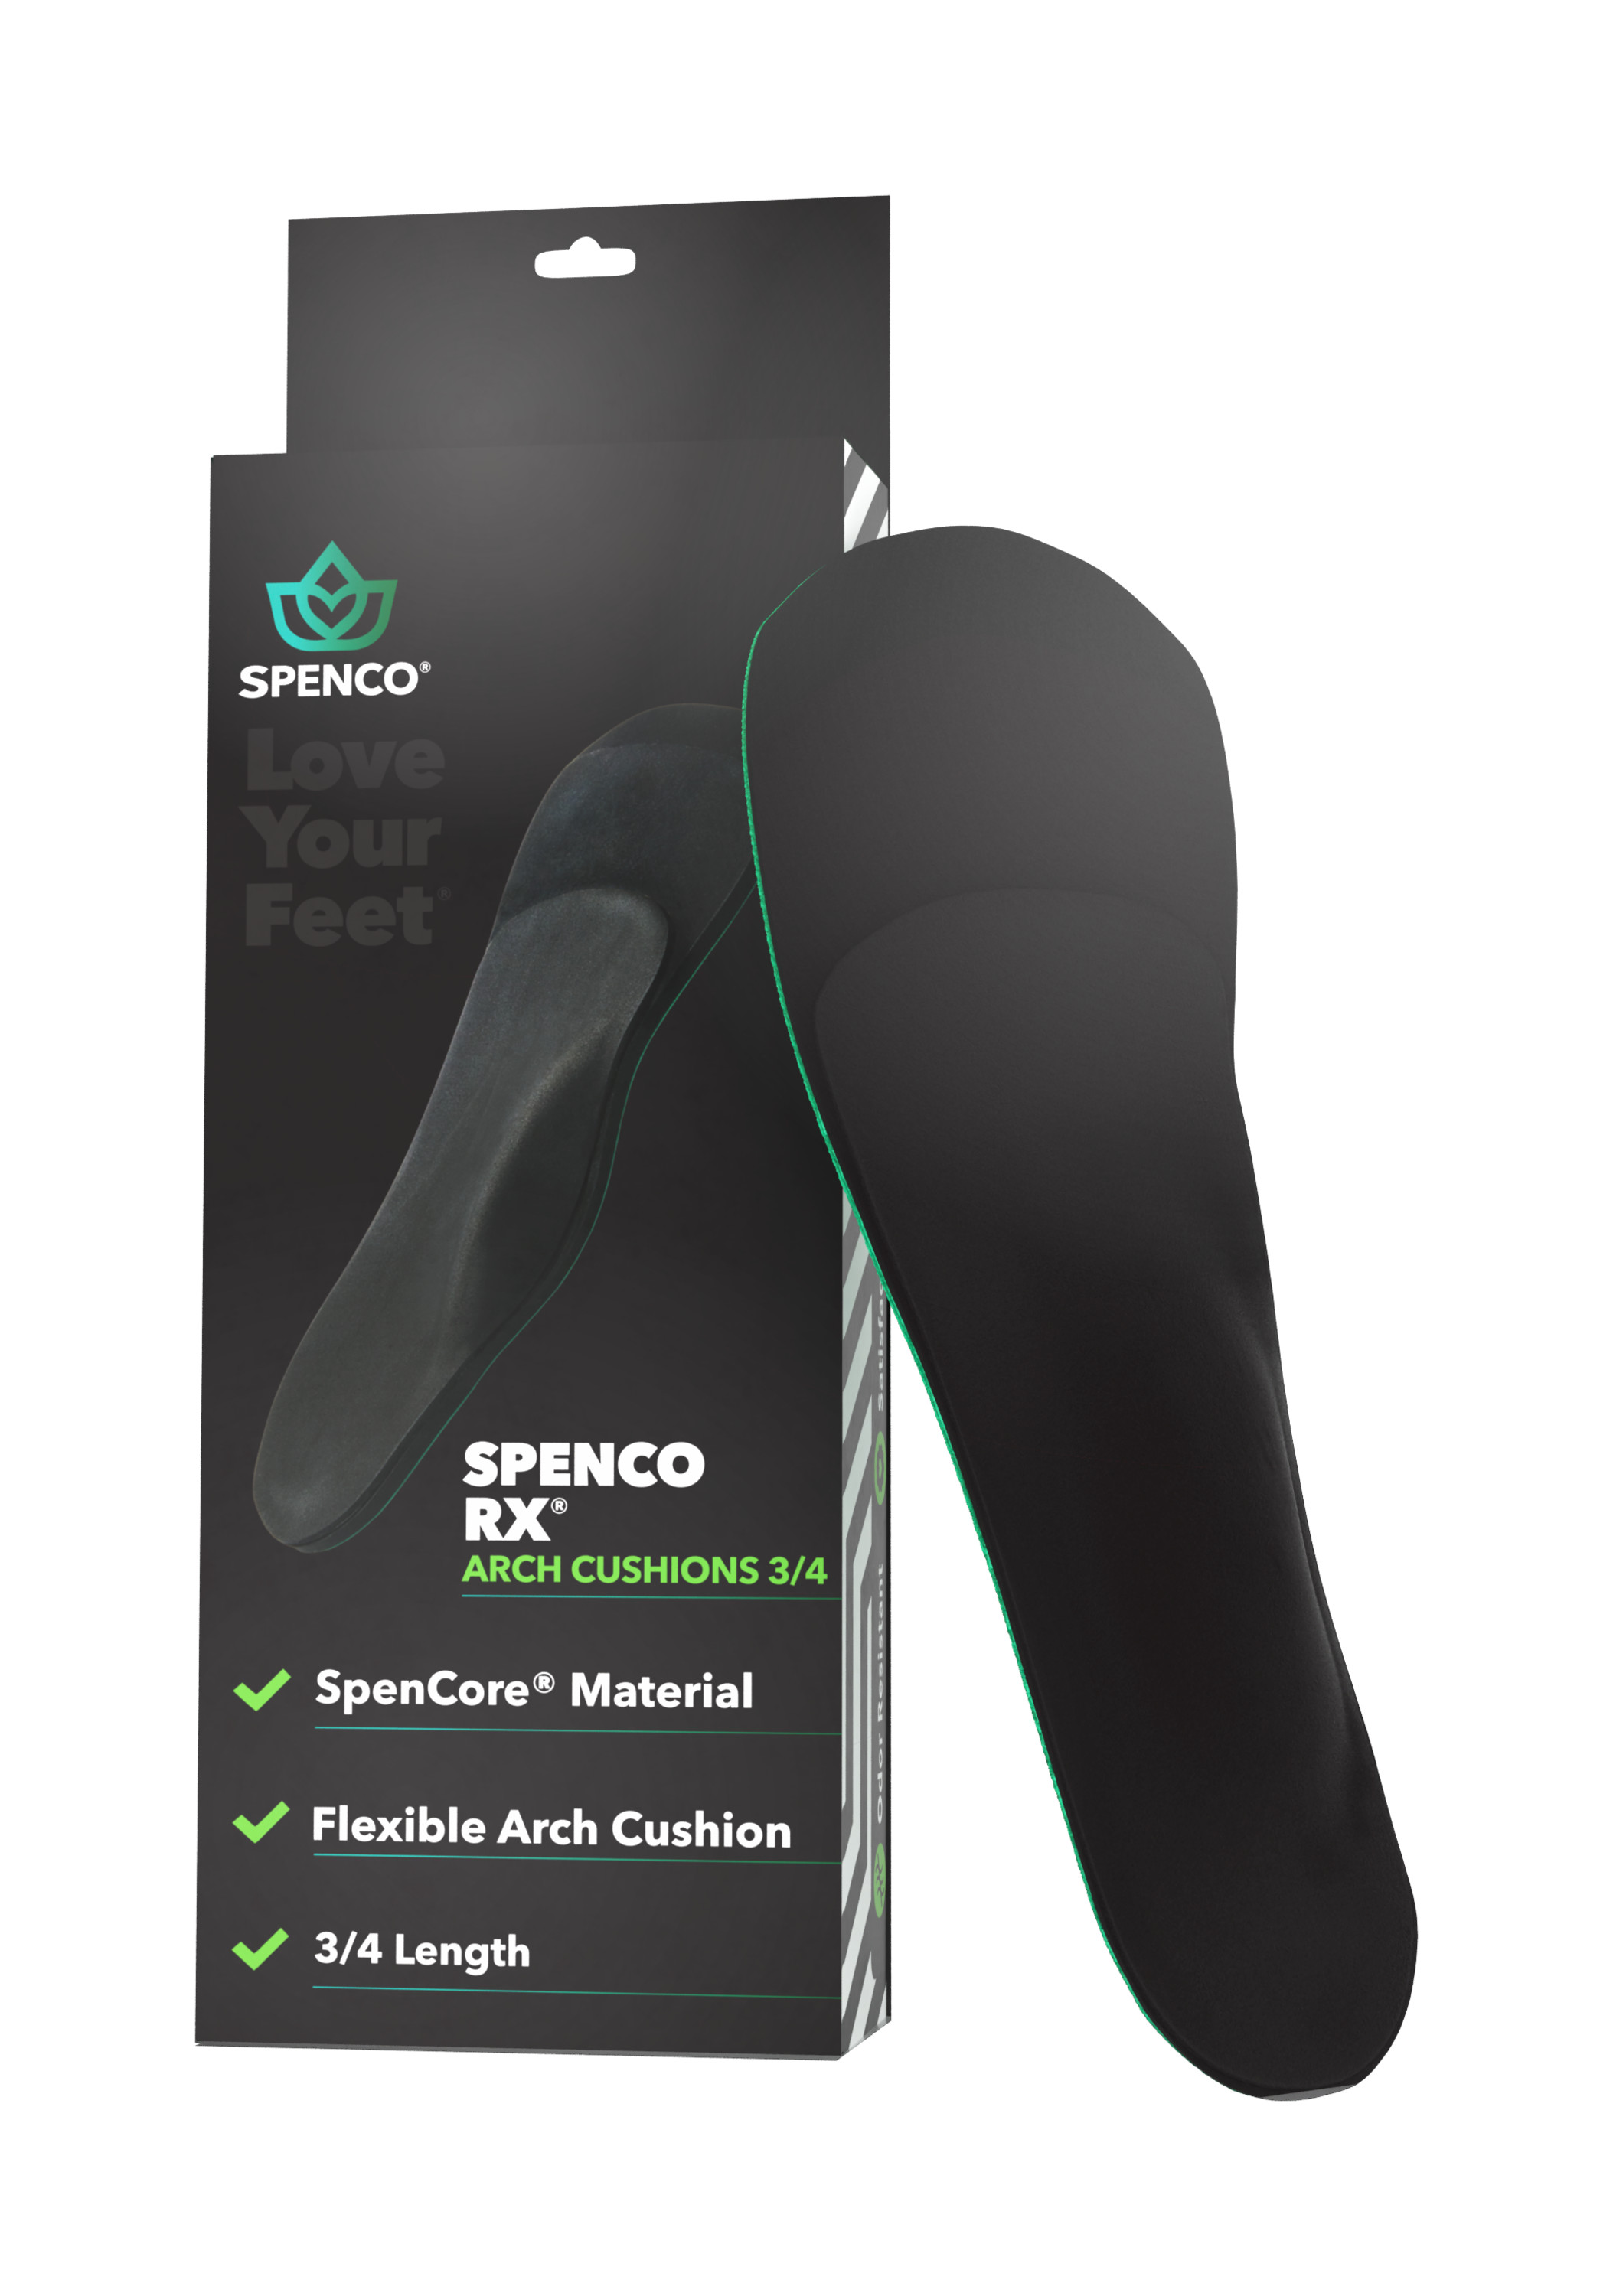 Spenco Rx Arch Cushions 3/4 Length Insole - image 1 of 7